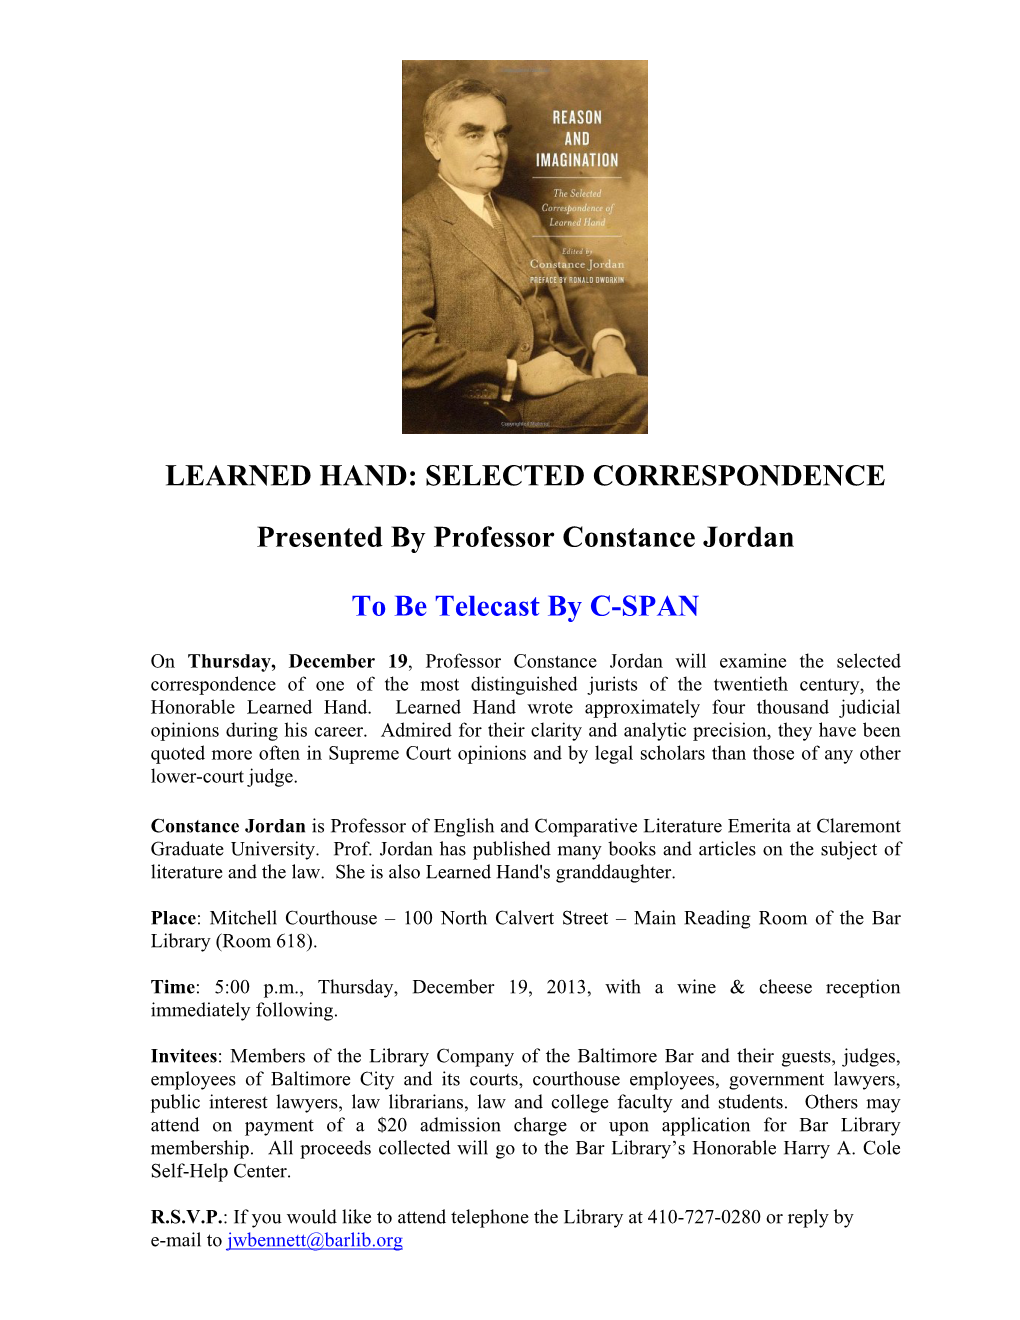 Learned Hand: Selected Correspondence